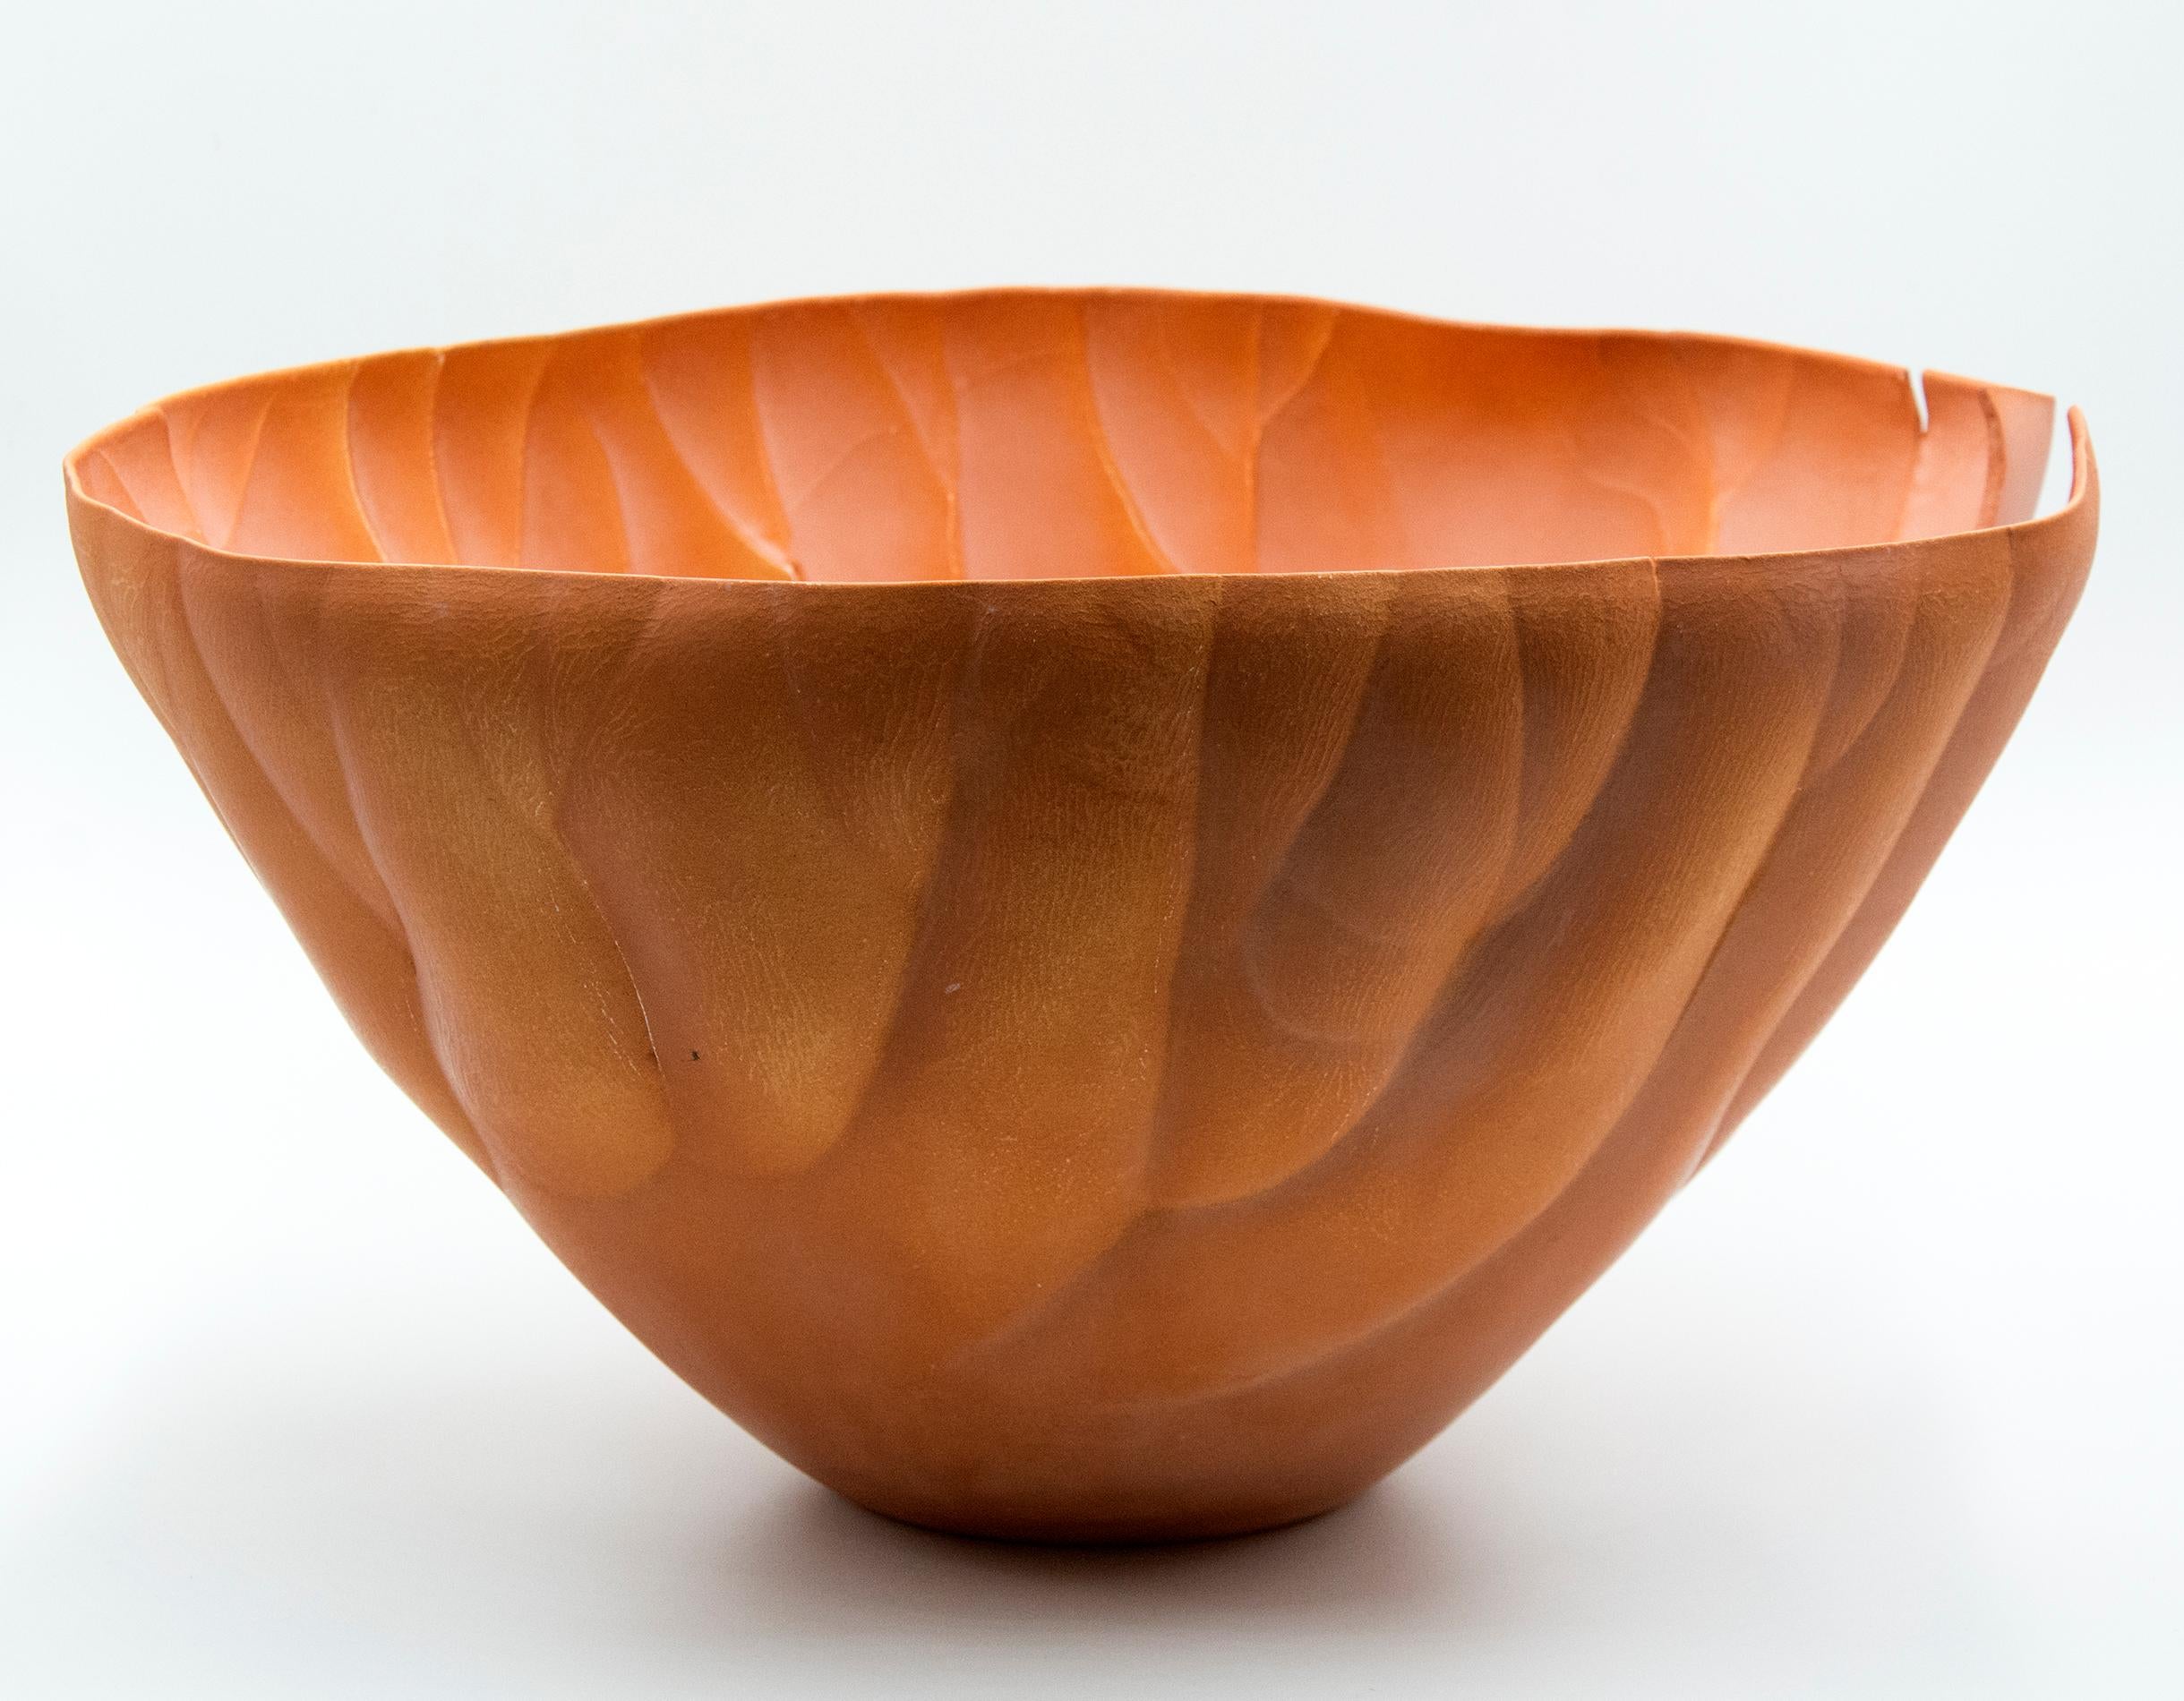 Canyon Crevice Bowl - intricate, hand-shaped, porcelain clay vessel - Sculpture by Paula Murray